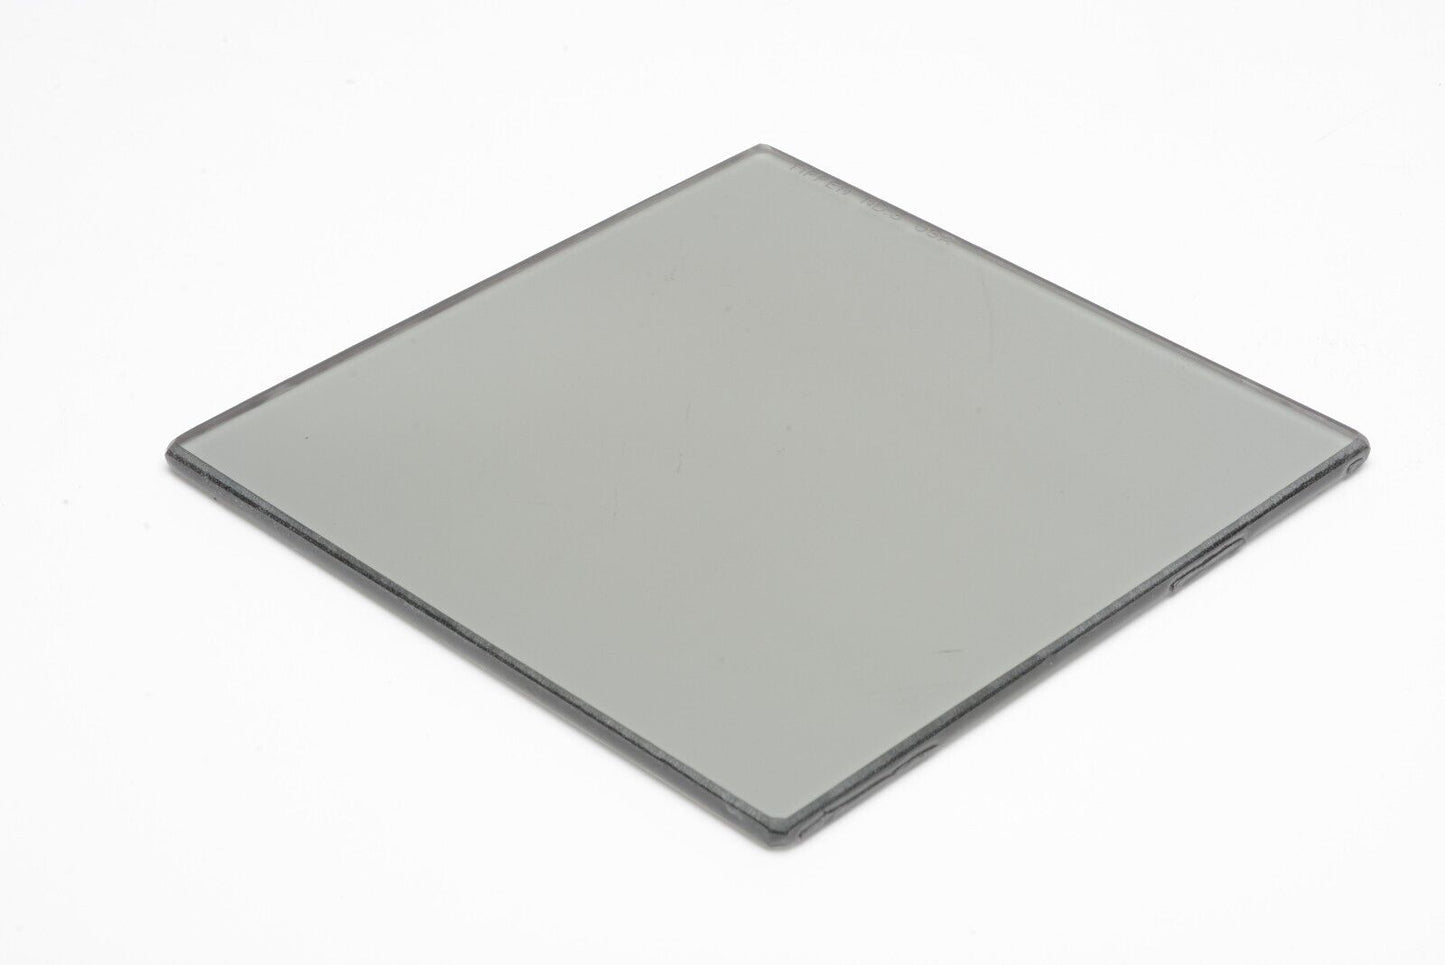 EXC+++ TIFFEN 100mm SQUARE NEUTRAL DENSITY ND.3 1 STOP, VERY CLEAN, IN POUCH